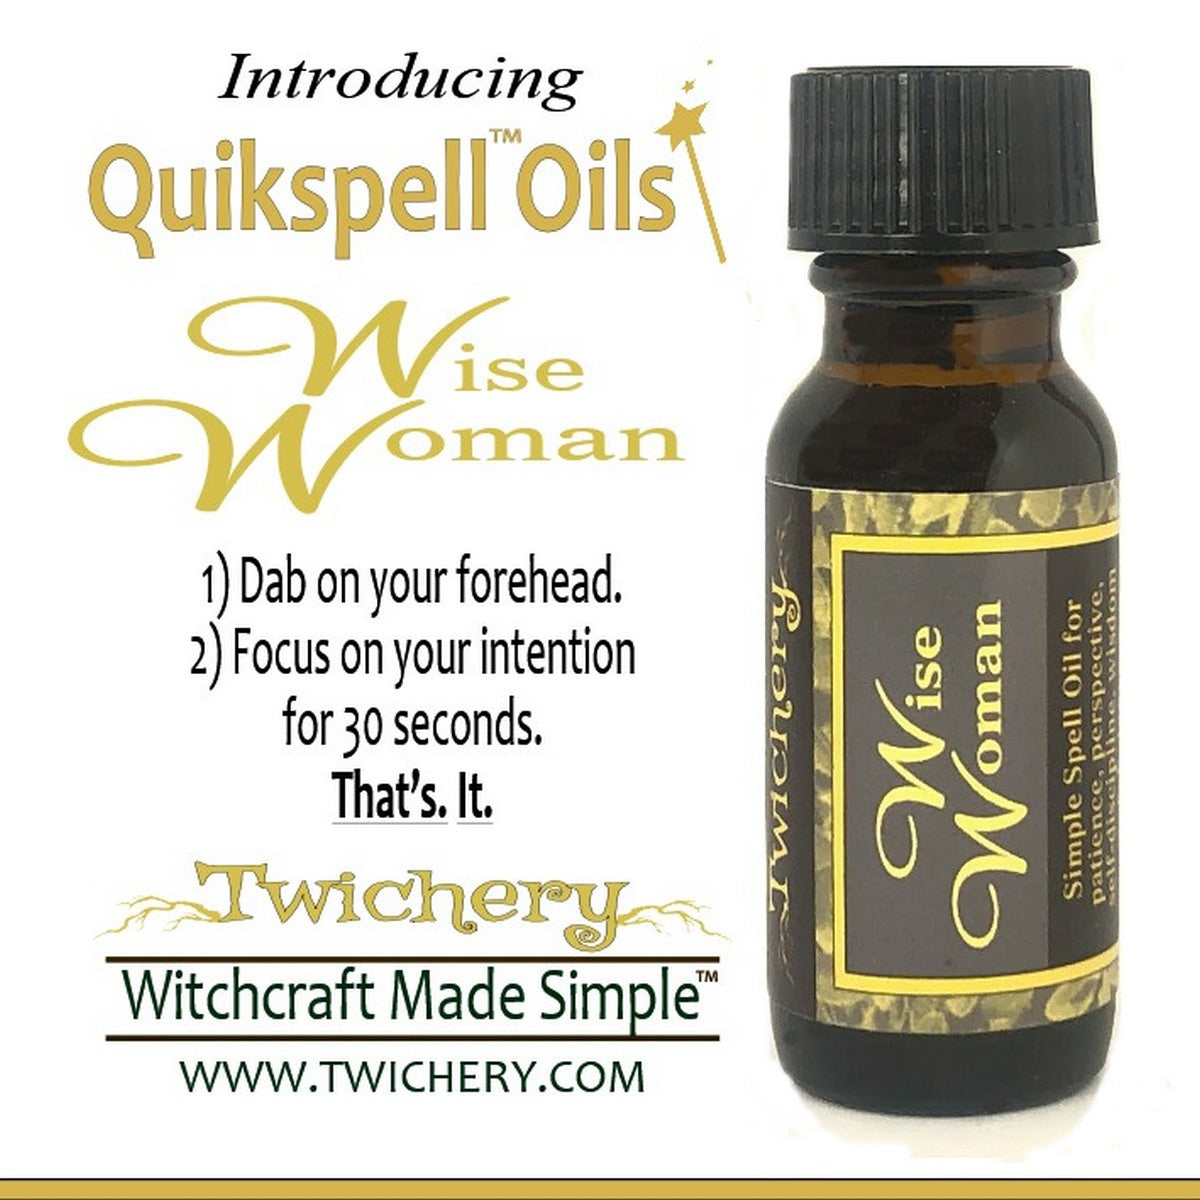 Twichery Wise Woman Quikspell Oil is for balance and wisdom in your daily life. Overcome crazy impulses. Think with patience. Hoodoo, voodoo, wicca, pagan Witchcraft Made Simple